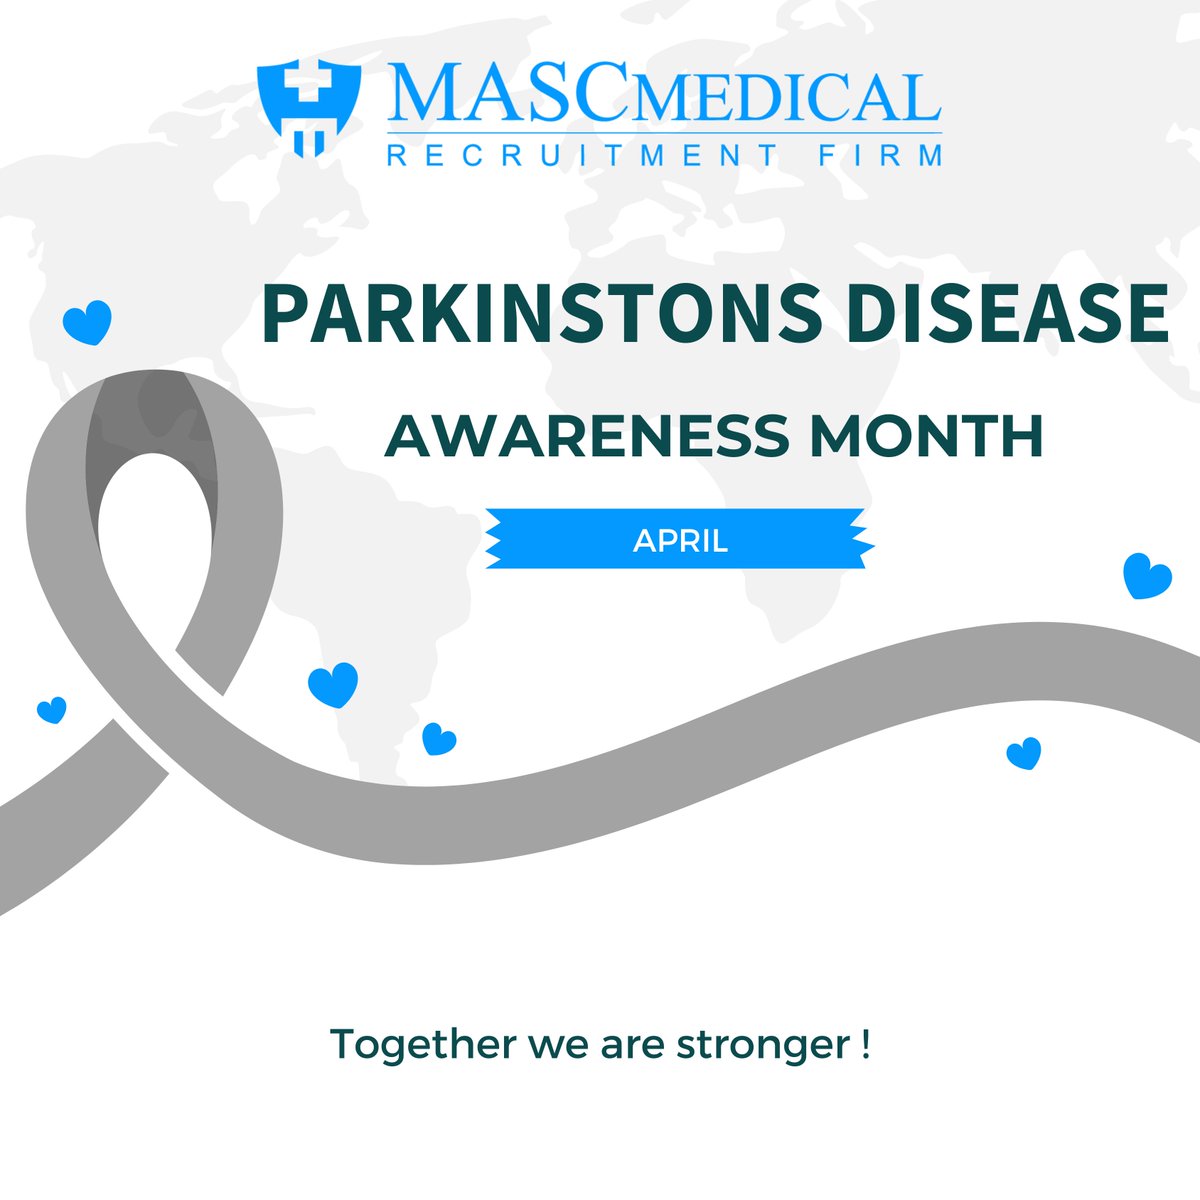 Parkinson's Disease impacts millions worldwide, yet misconceptions and lack of awareness persist.

#physicianrecruiter #physicianjobs #physicianrecruitment  #physicianrecruiters #parkinstonsdisease